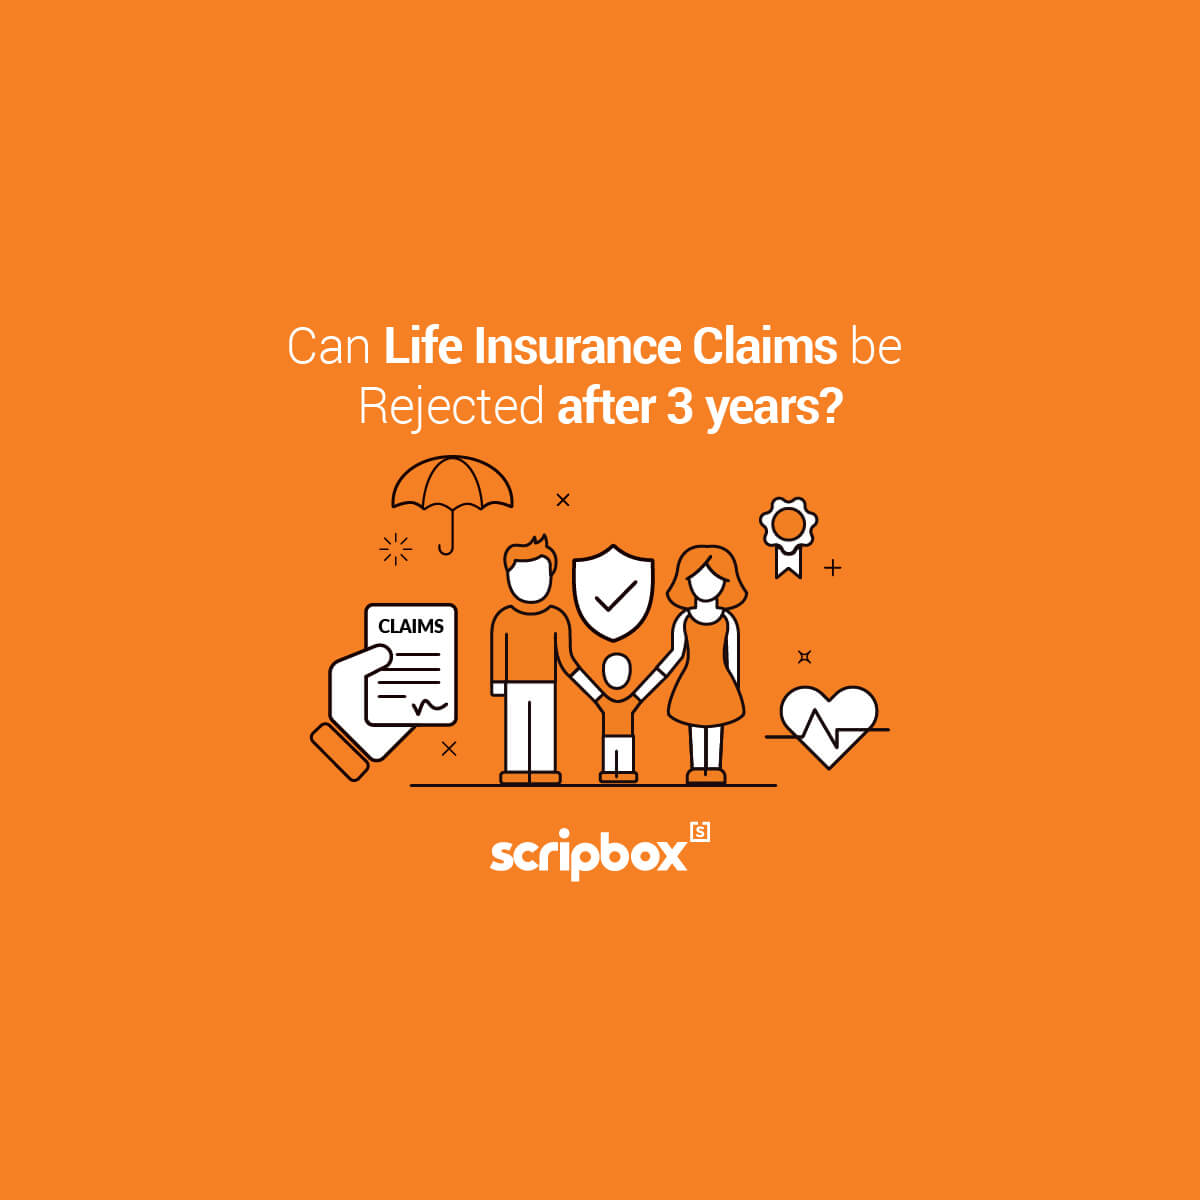 life insurance claims